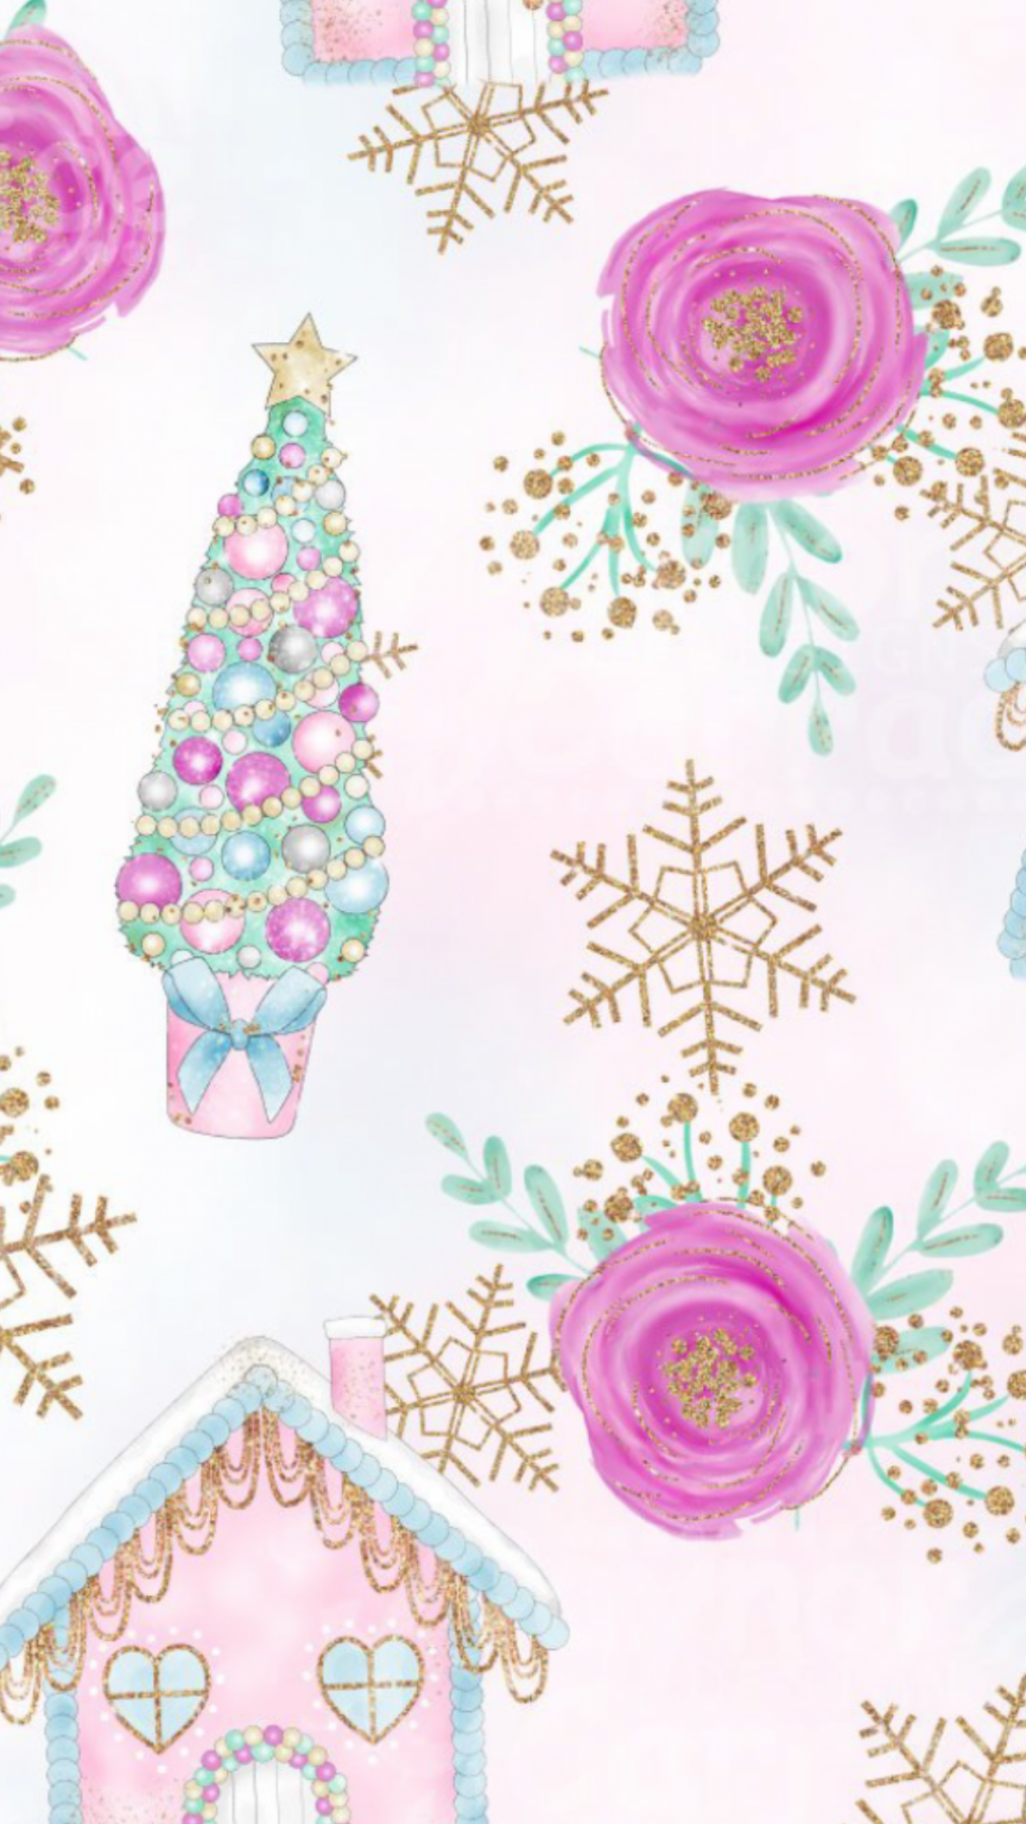 Christmas Wallpapers for iPhone - Cute and Vintage Backgrounds